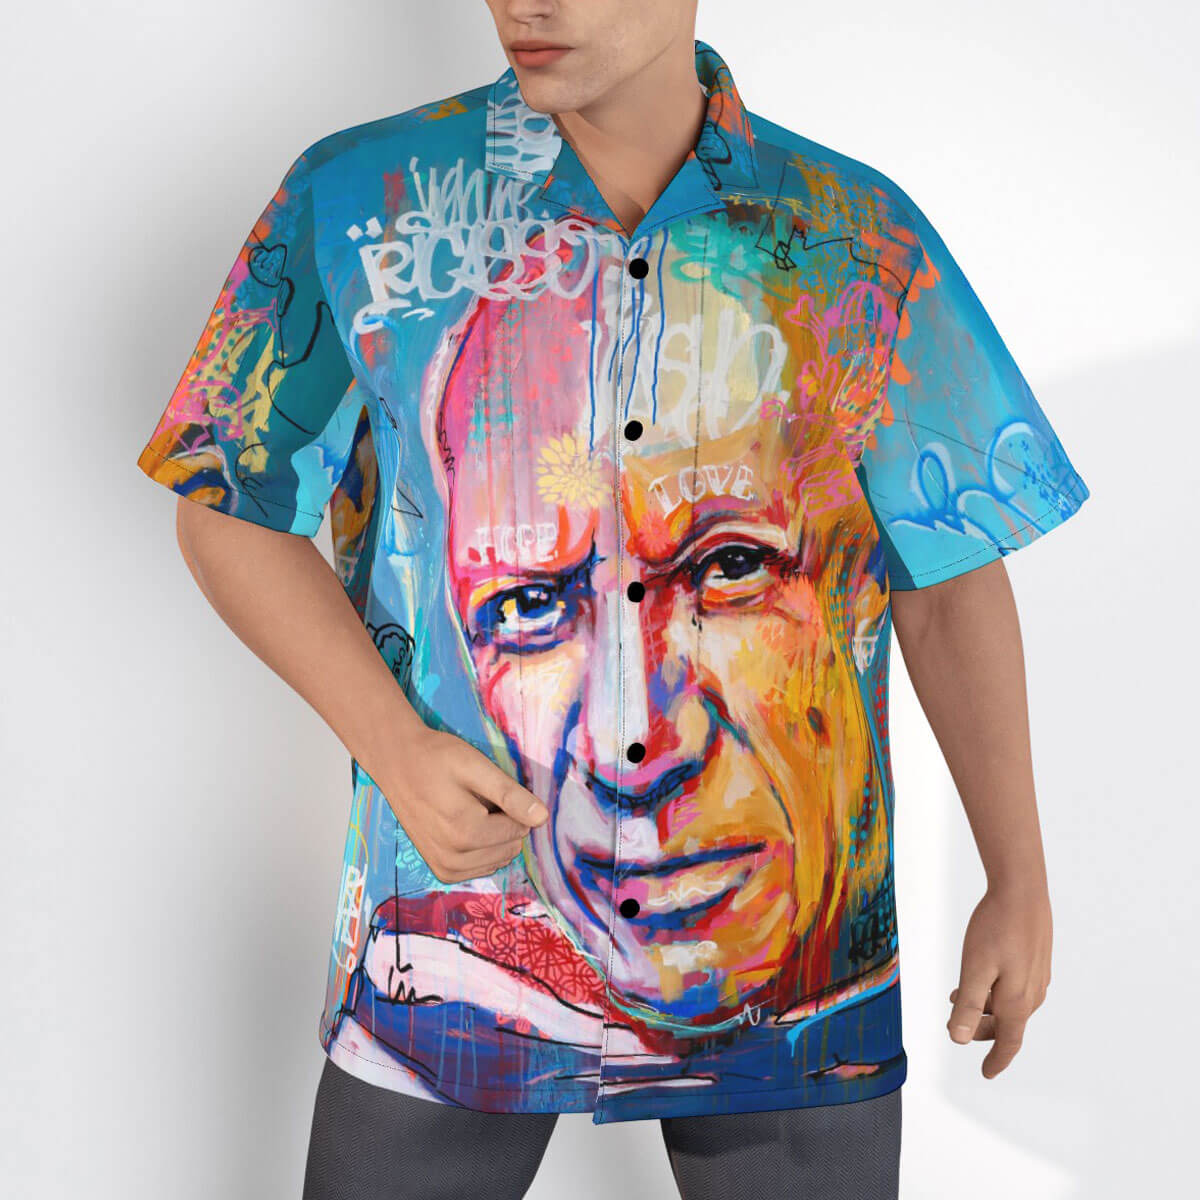 Detail of abstract Picasso portrait on tropical button-up shirt